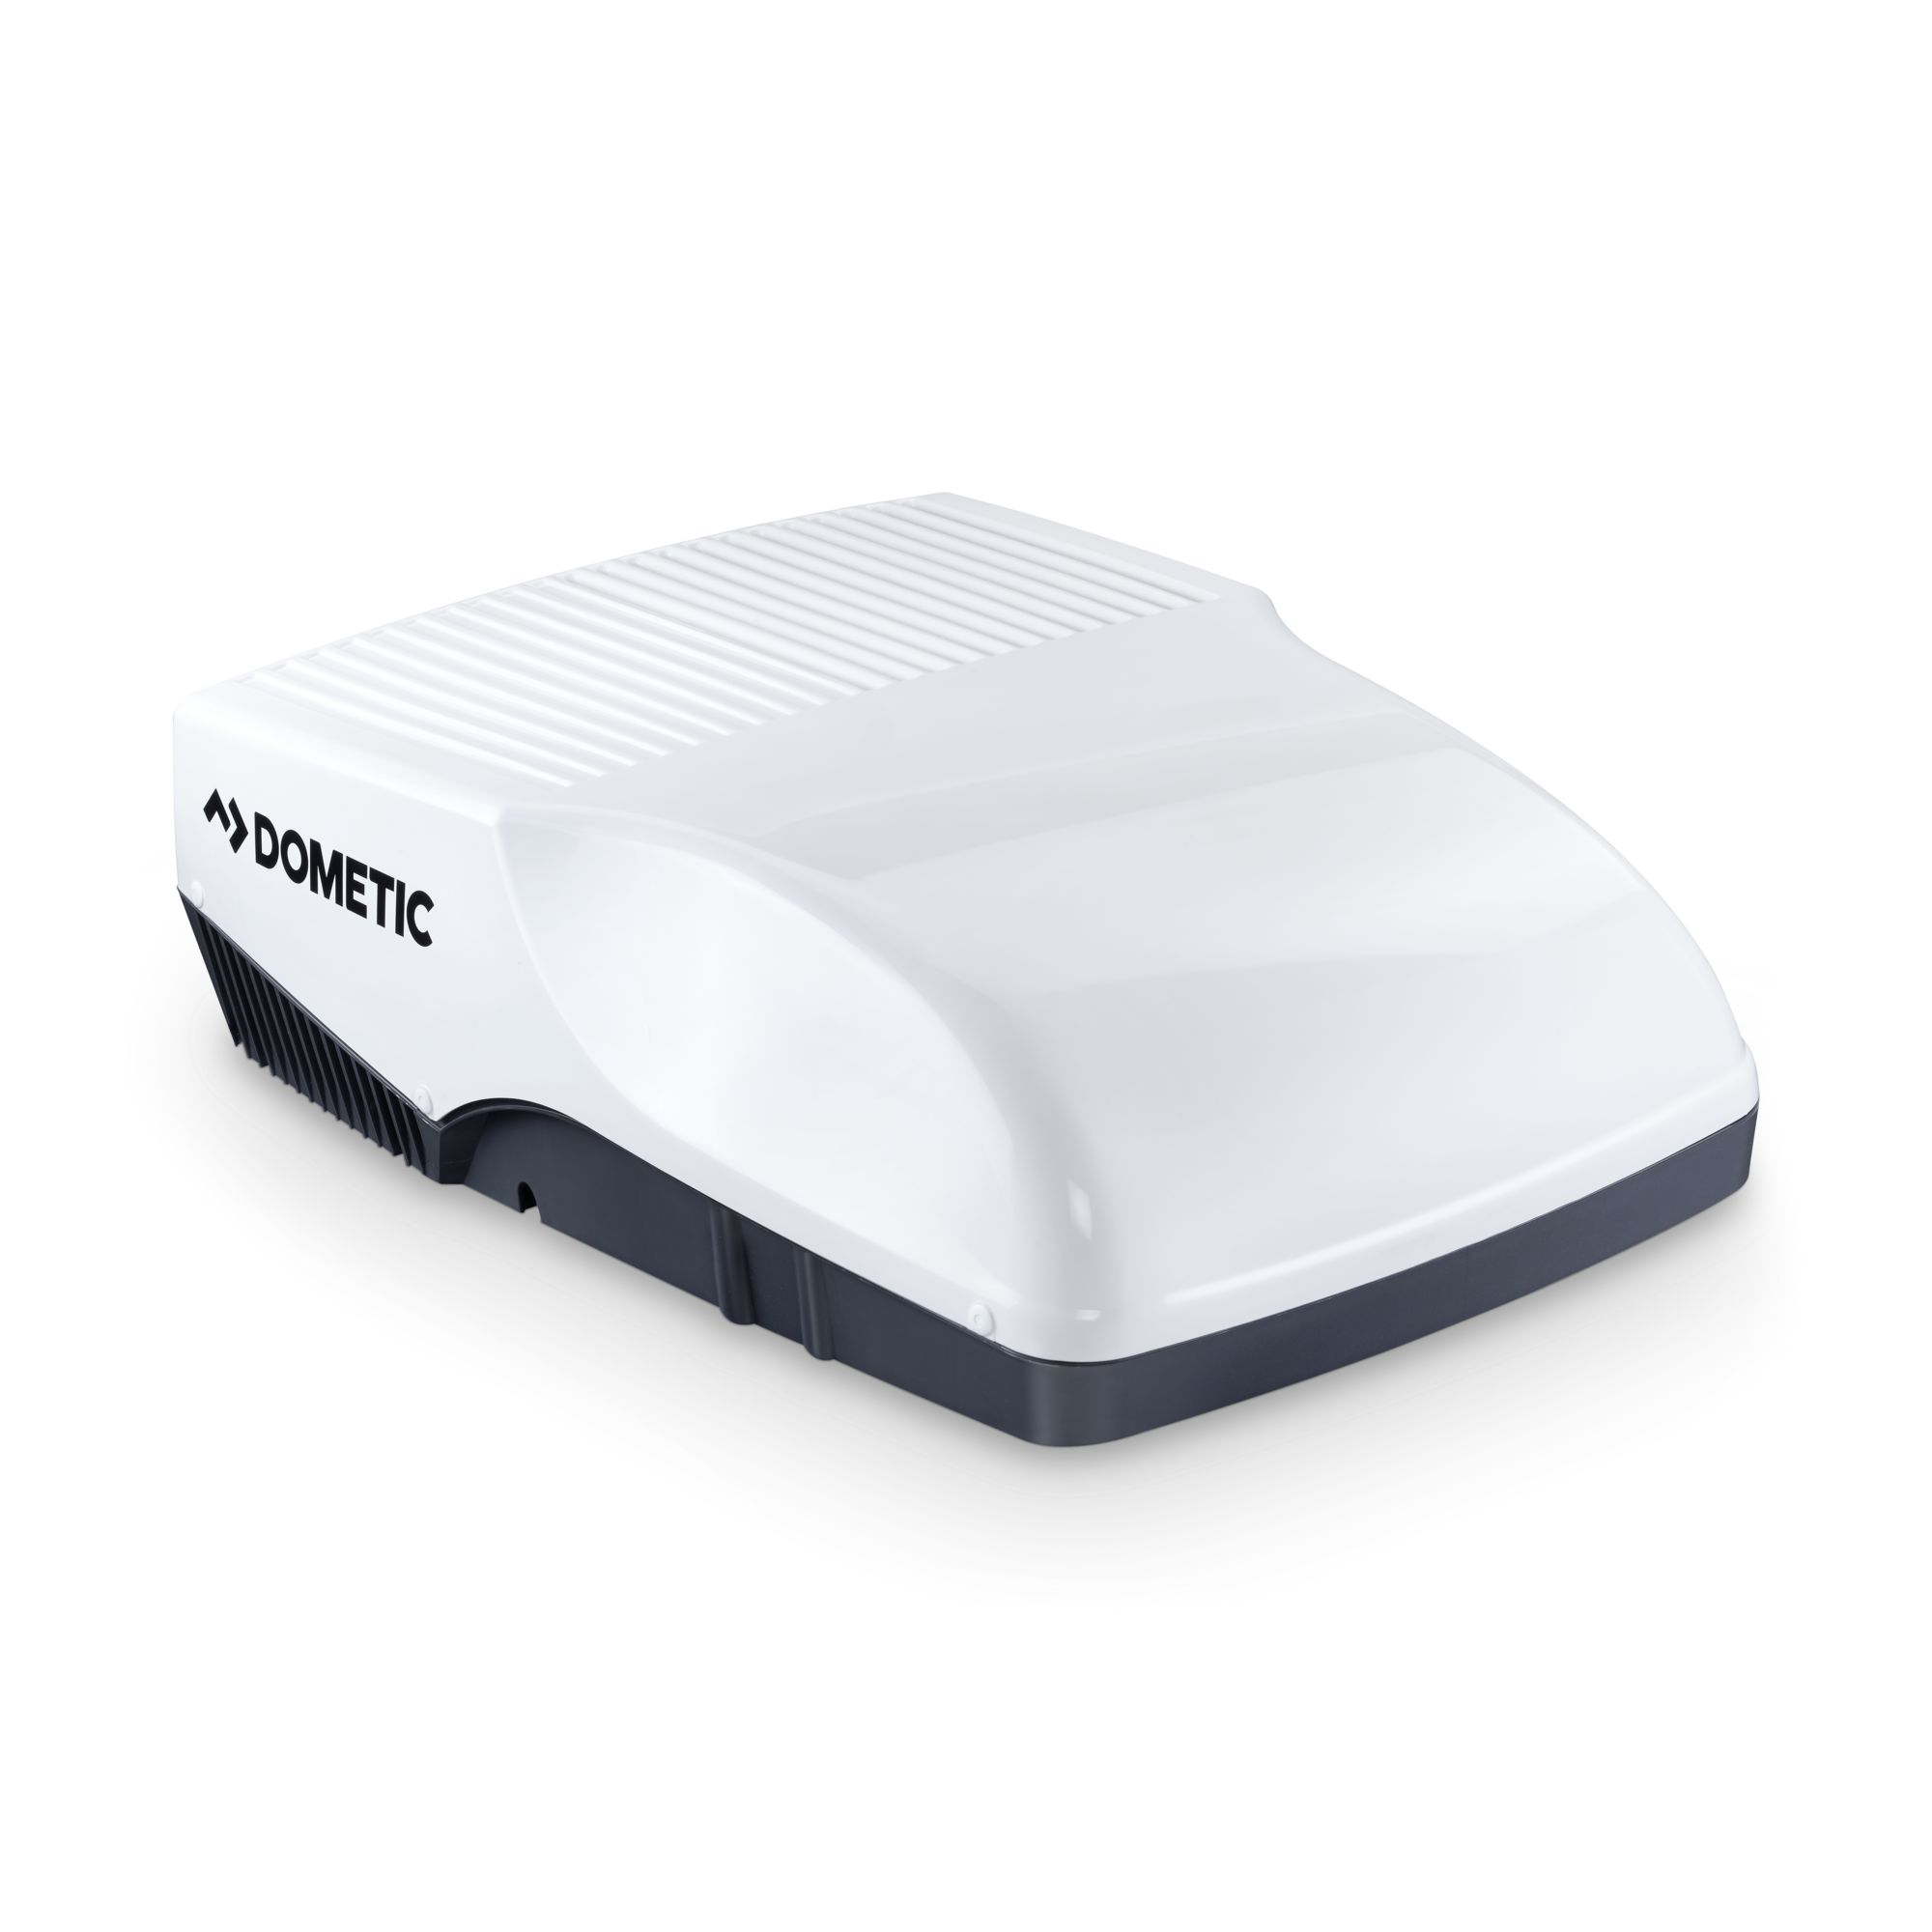 Dometic FreshJet 1700 air conditioner for vehicles up to 6 meters length